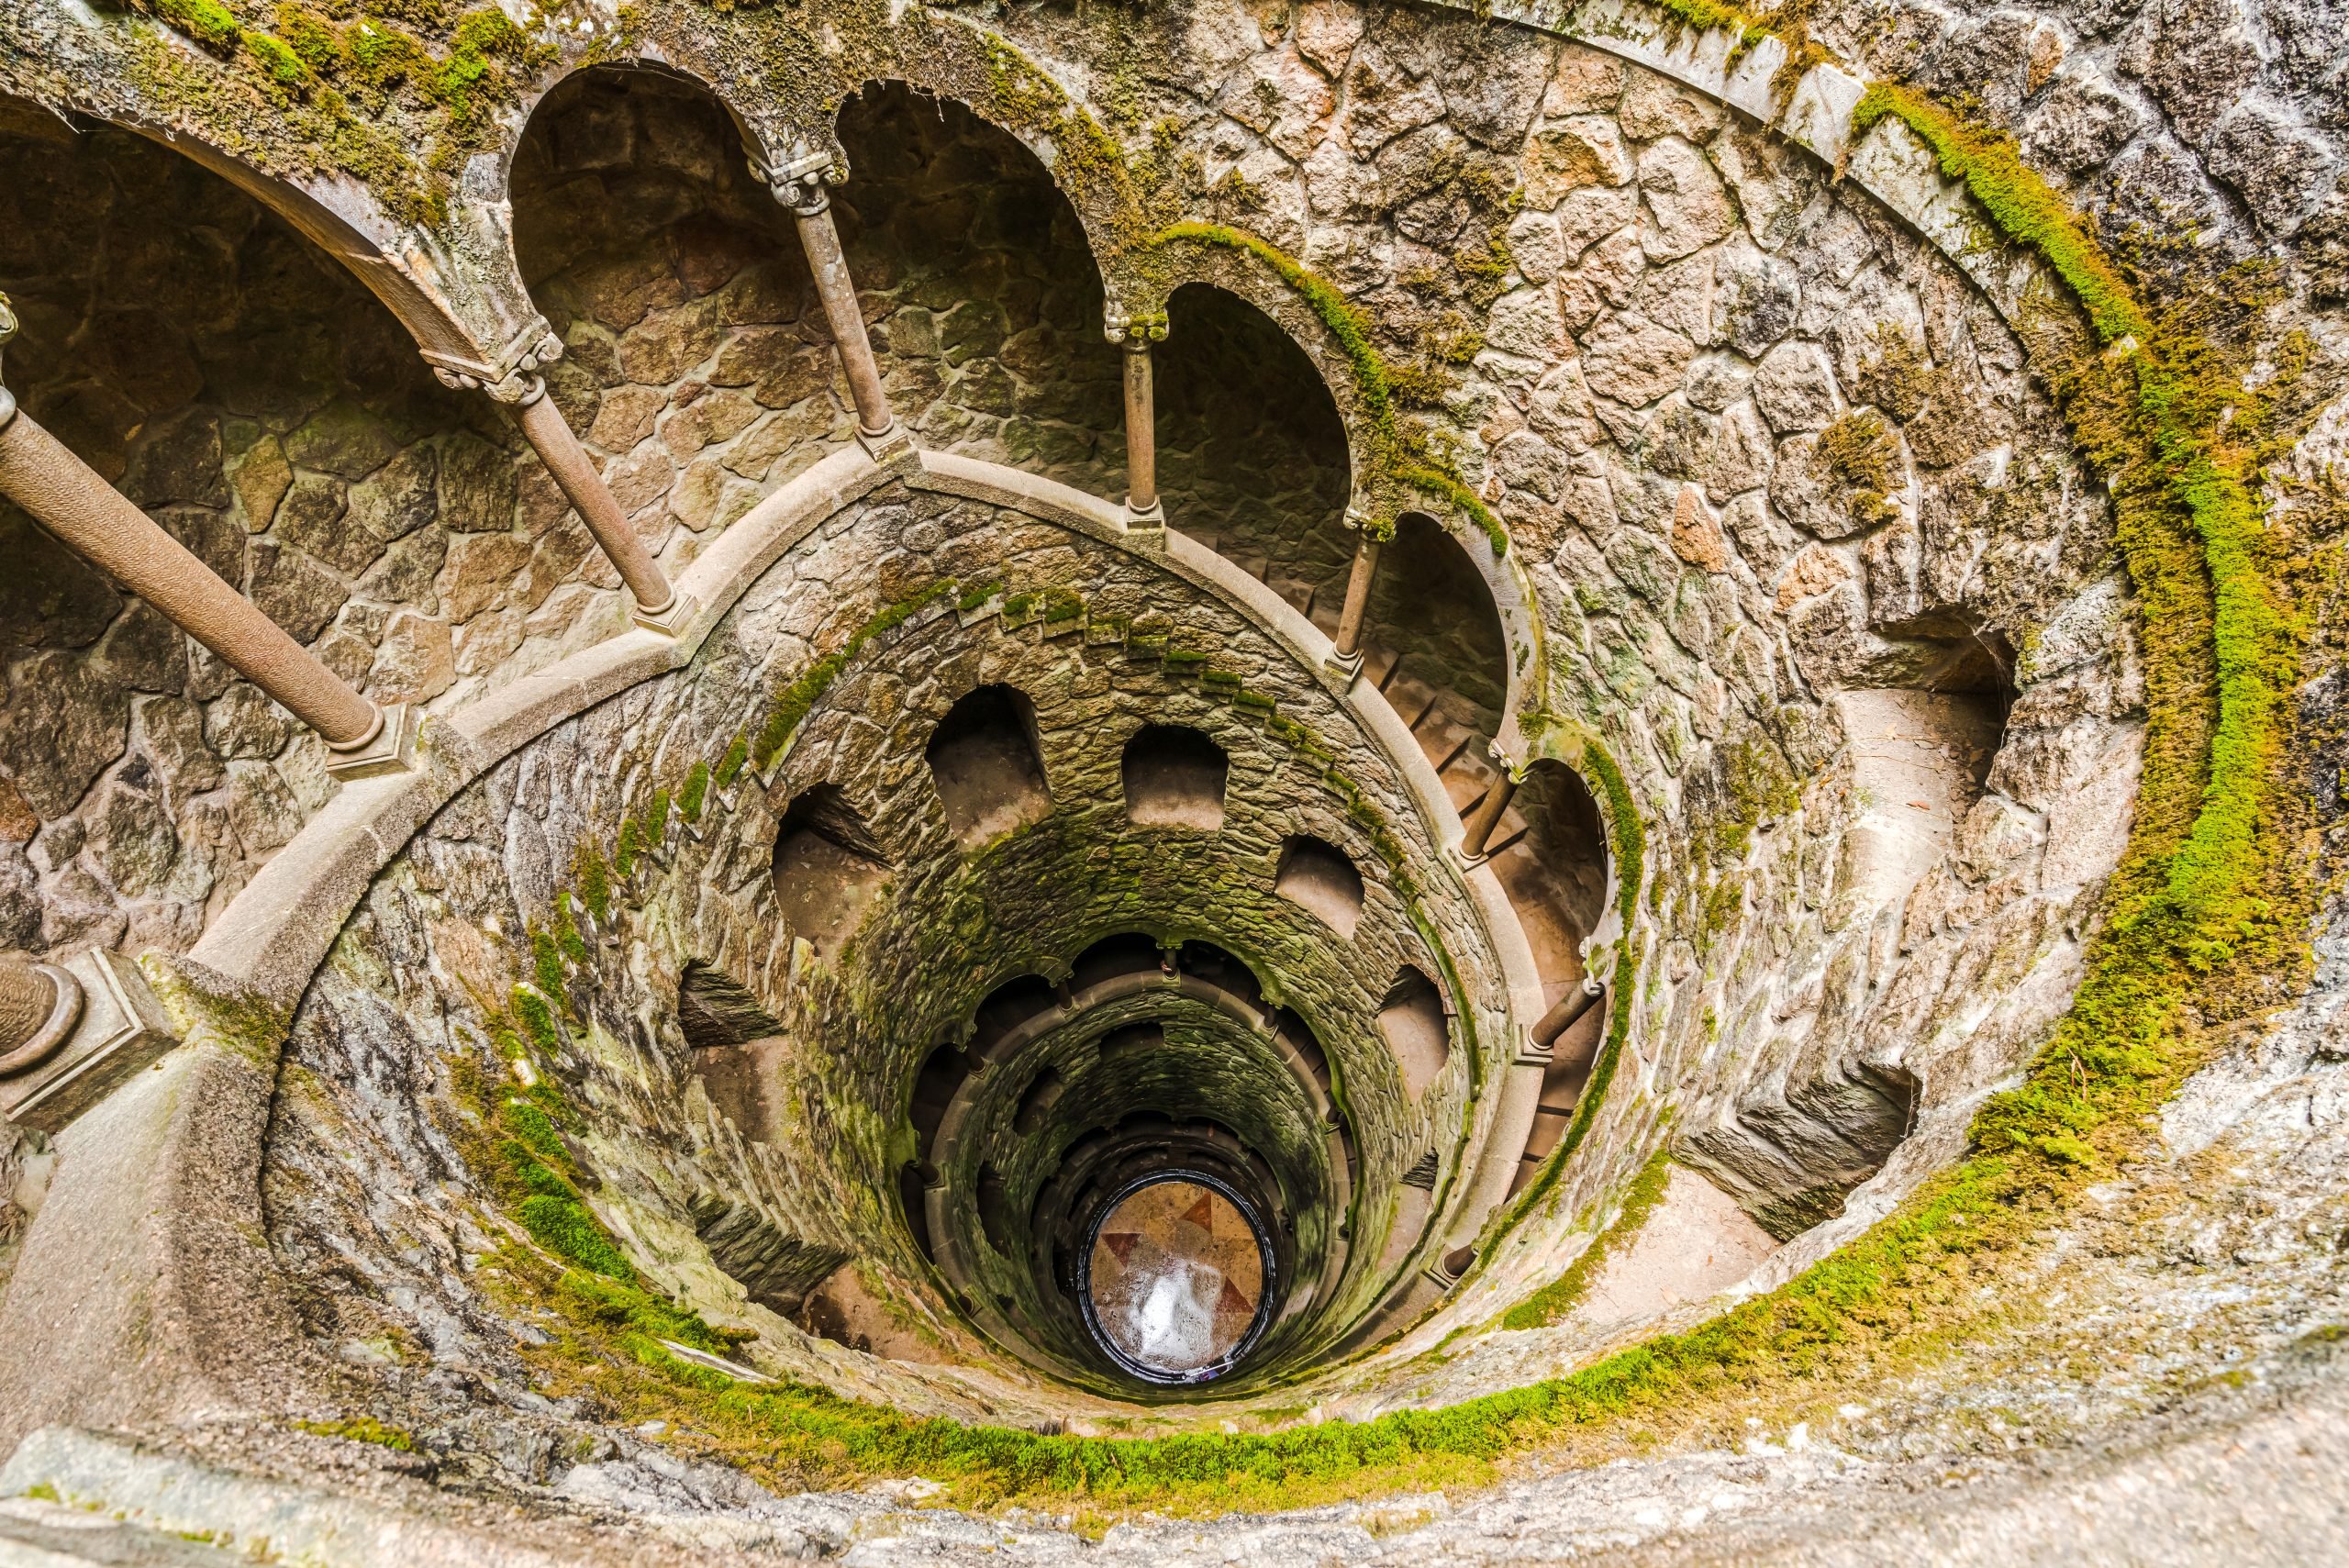 View on Initiation Well of Quinta da Regaleira in Sintra, Portugal